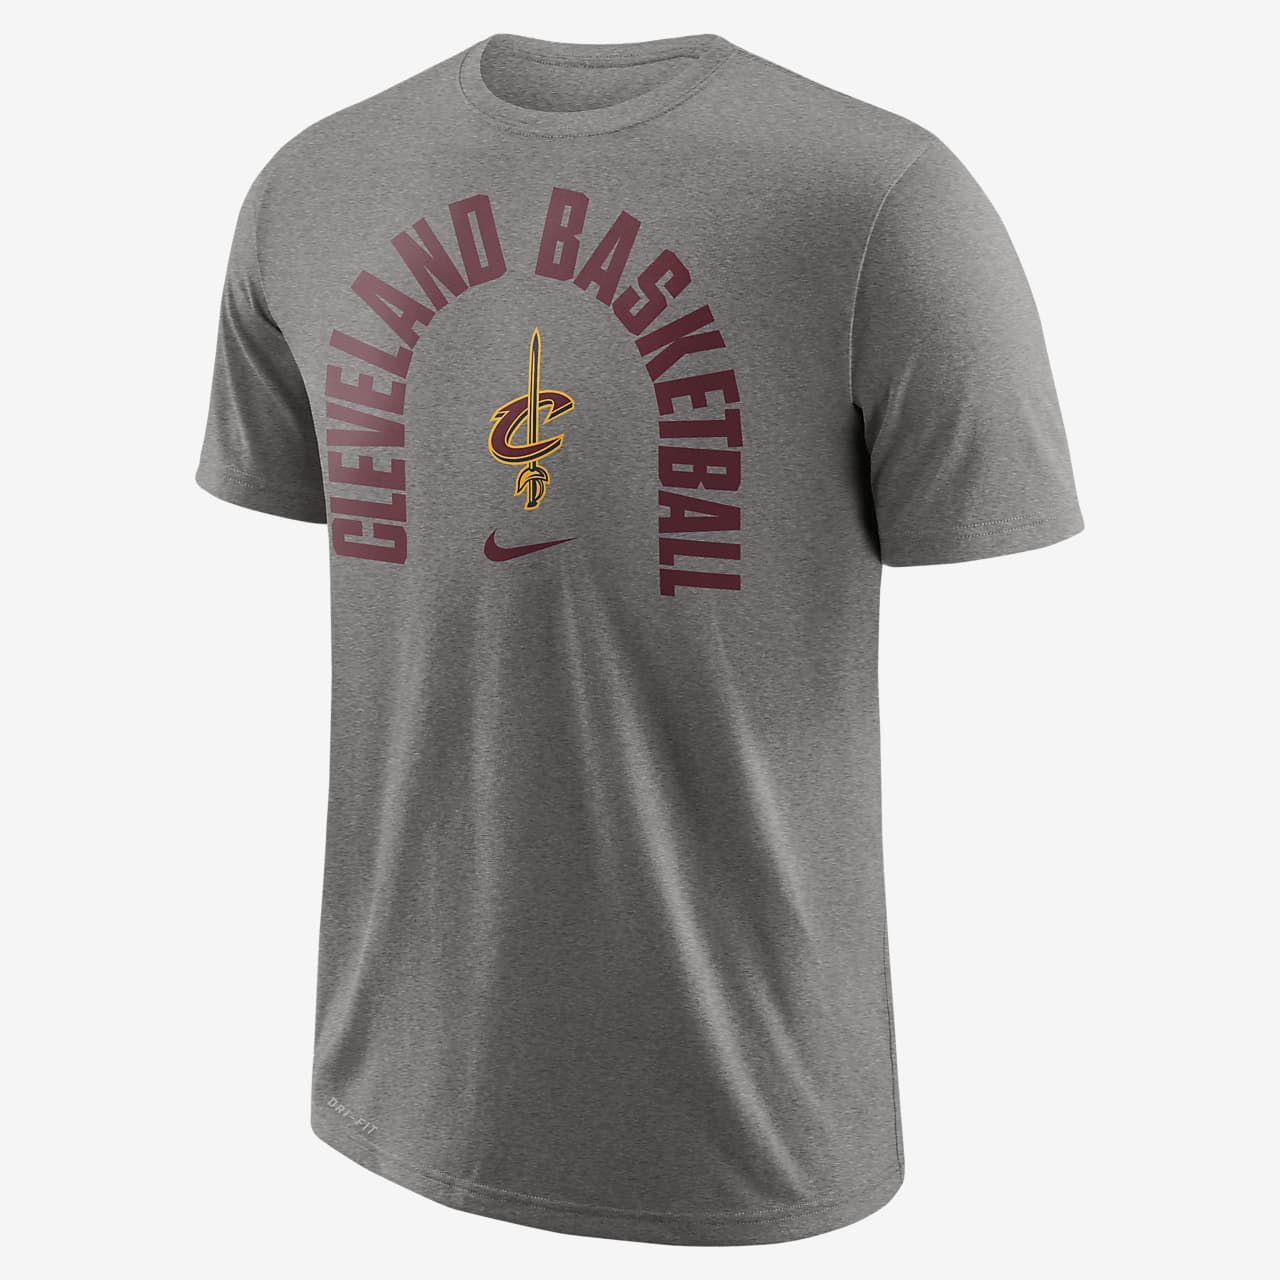 Cleveland Cavaliers Nike Dry Men's NBA T-Shirt. Nike IN